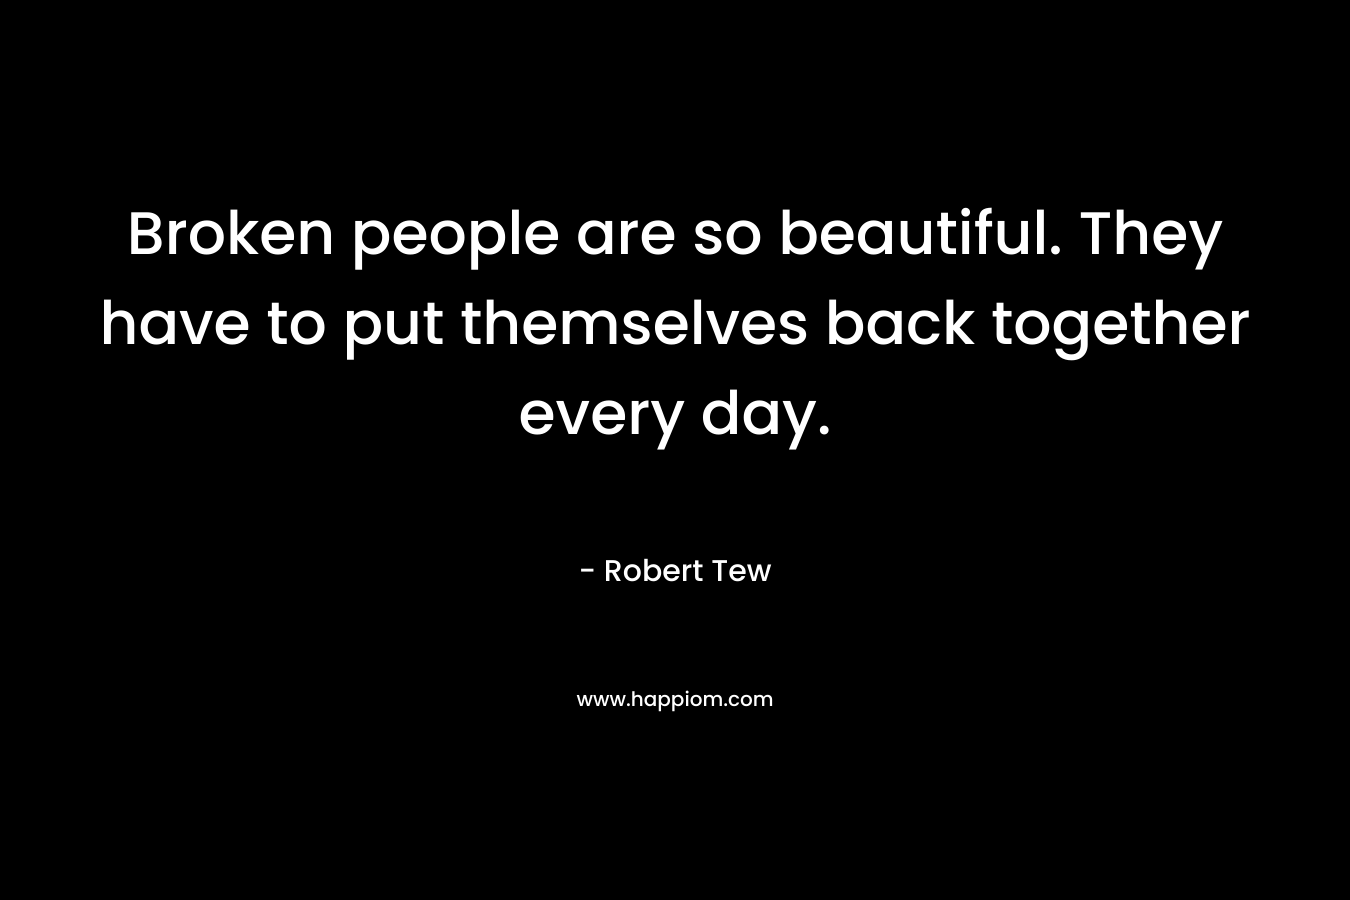 Broken people are so beautiful. They have to put themselves back together every day.